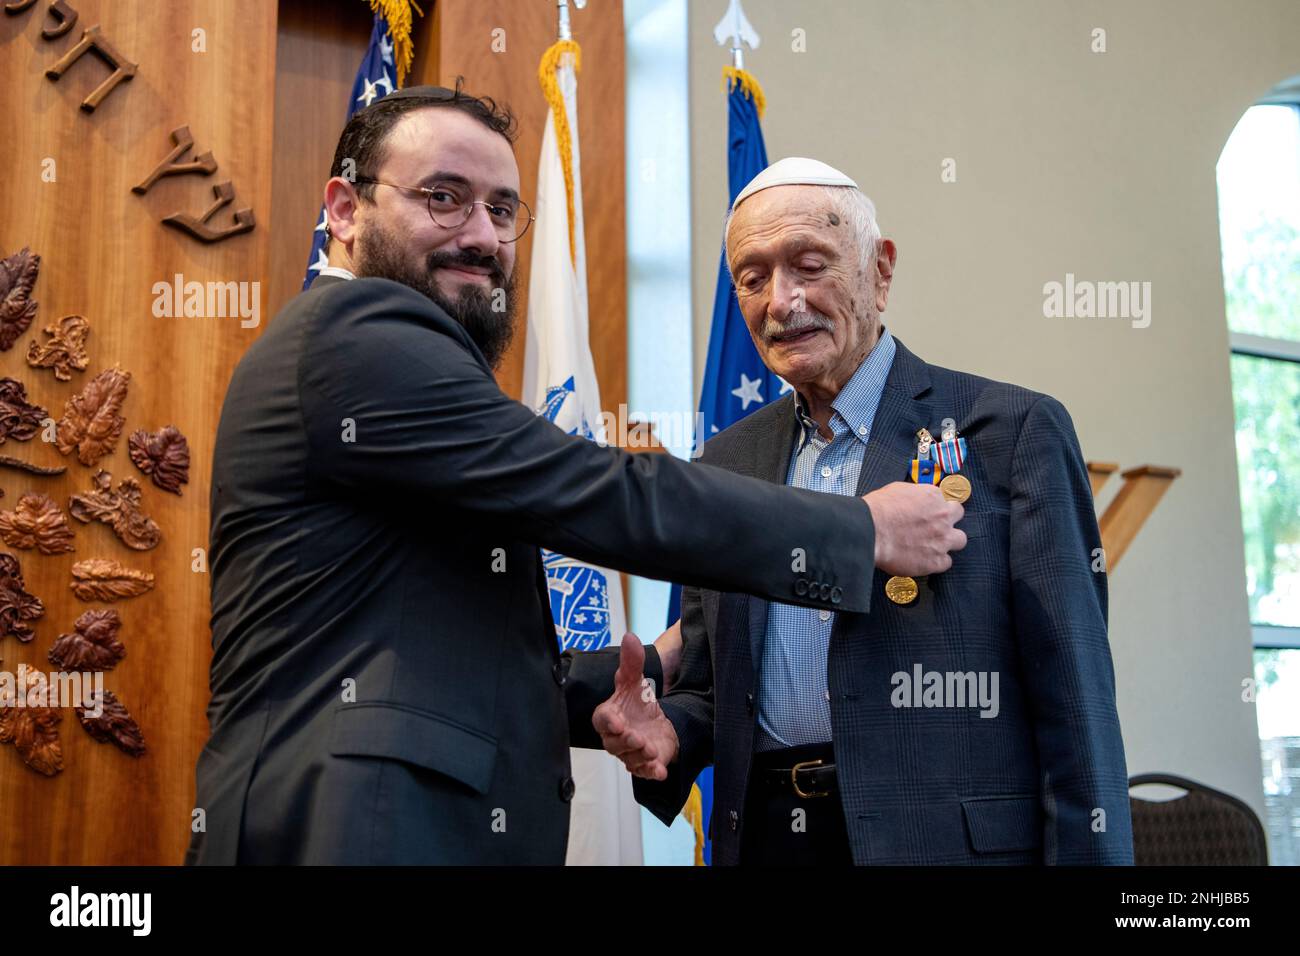 U.S. Army Air Corps 1st Lt. Gerald Teldon (right), retired, receives his award from his grandson, Rabbi Zalman Teldon, for his honorable service as a pilot on July 29, 2022, at the Chabad Center for Jewish Life and Learning, San Antonio, Texas. Teldon, born in Bronx, N.Y., in 1924, joined the military in 1944. He completed 62 missions during WWII and the Korean War. Lt. Col. Andrew Stein, 502nd Operations Support Squadron commander, was the presiding officers. The awards presented to Teldon are as follows: the Air Medal; American Campaign Medal; European – African – Middle Eastern Campaign Med Stock Photo